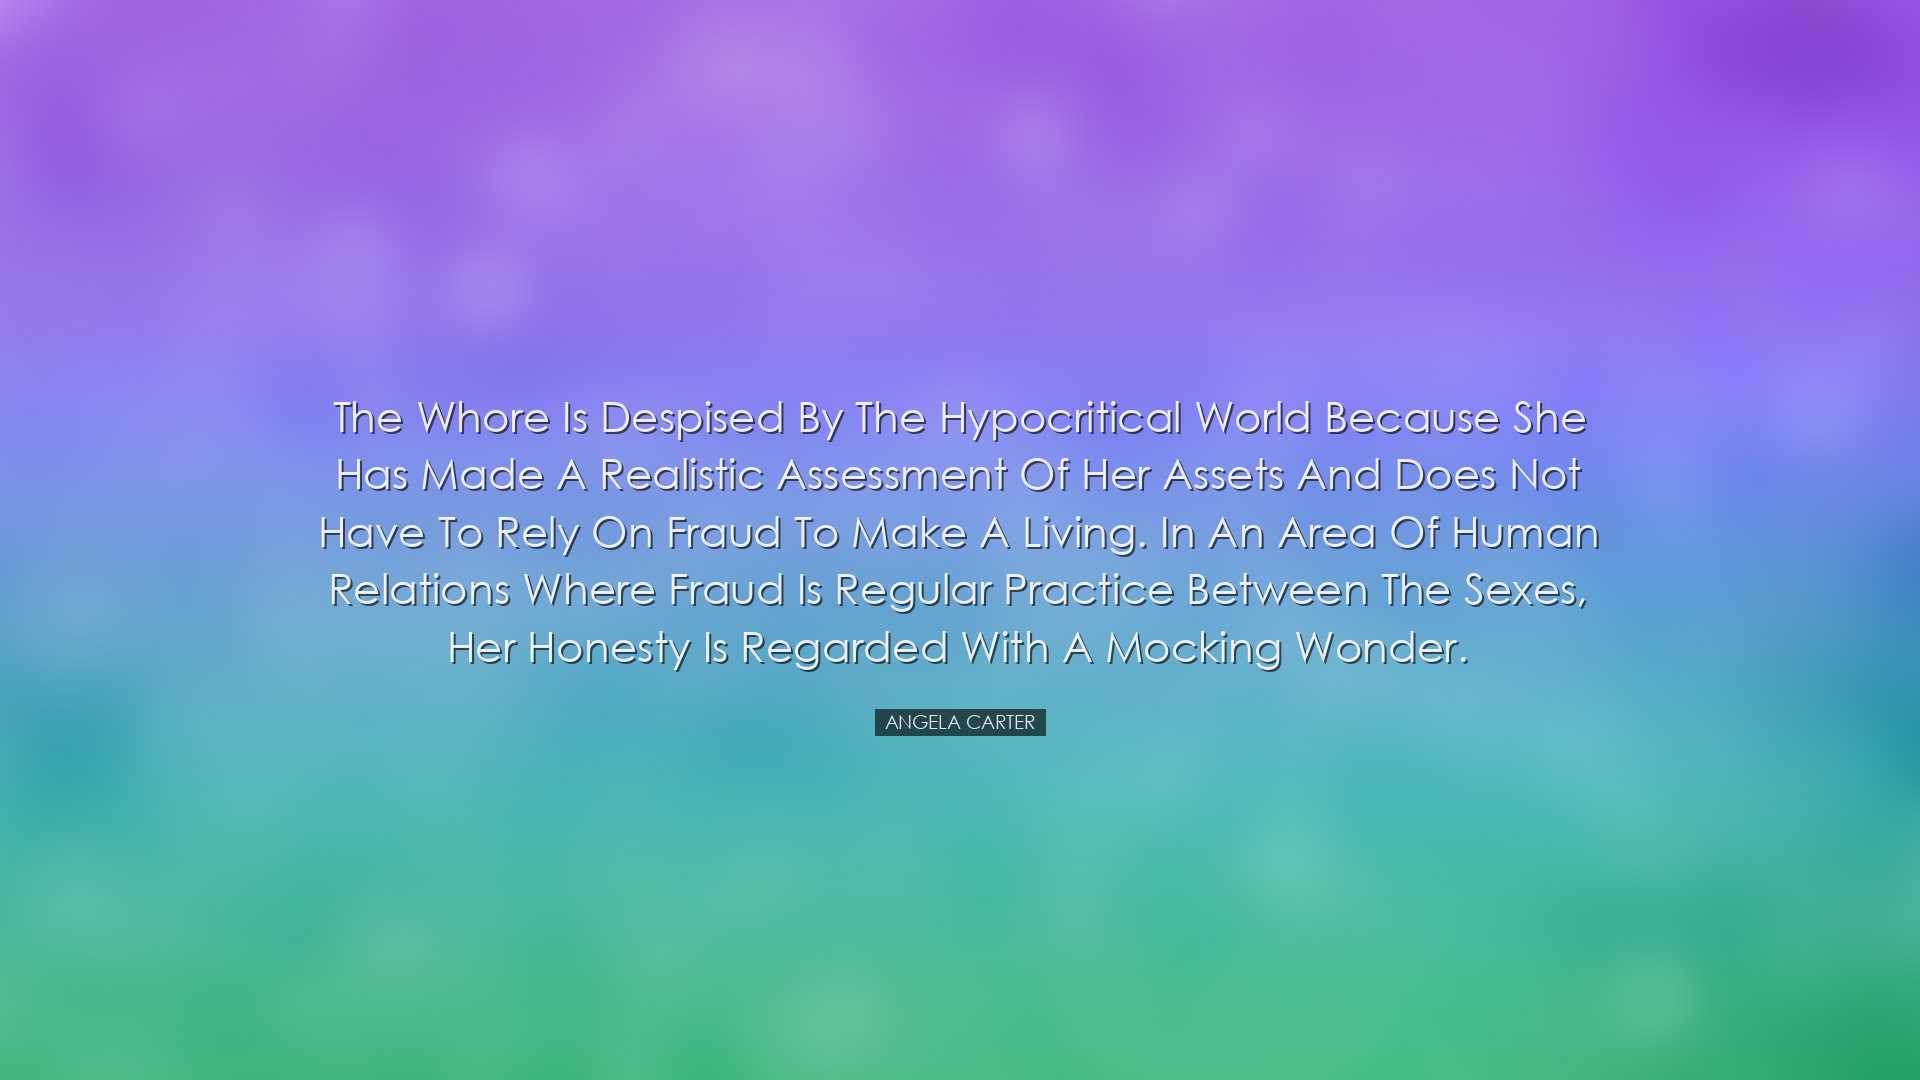 The whore is despised by the hypocritical world because she has ma